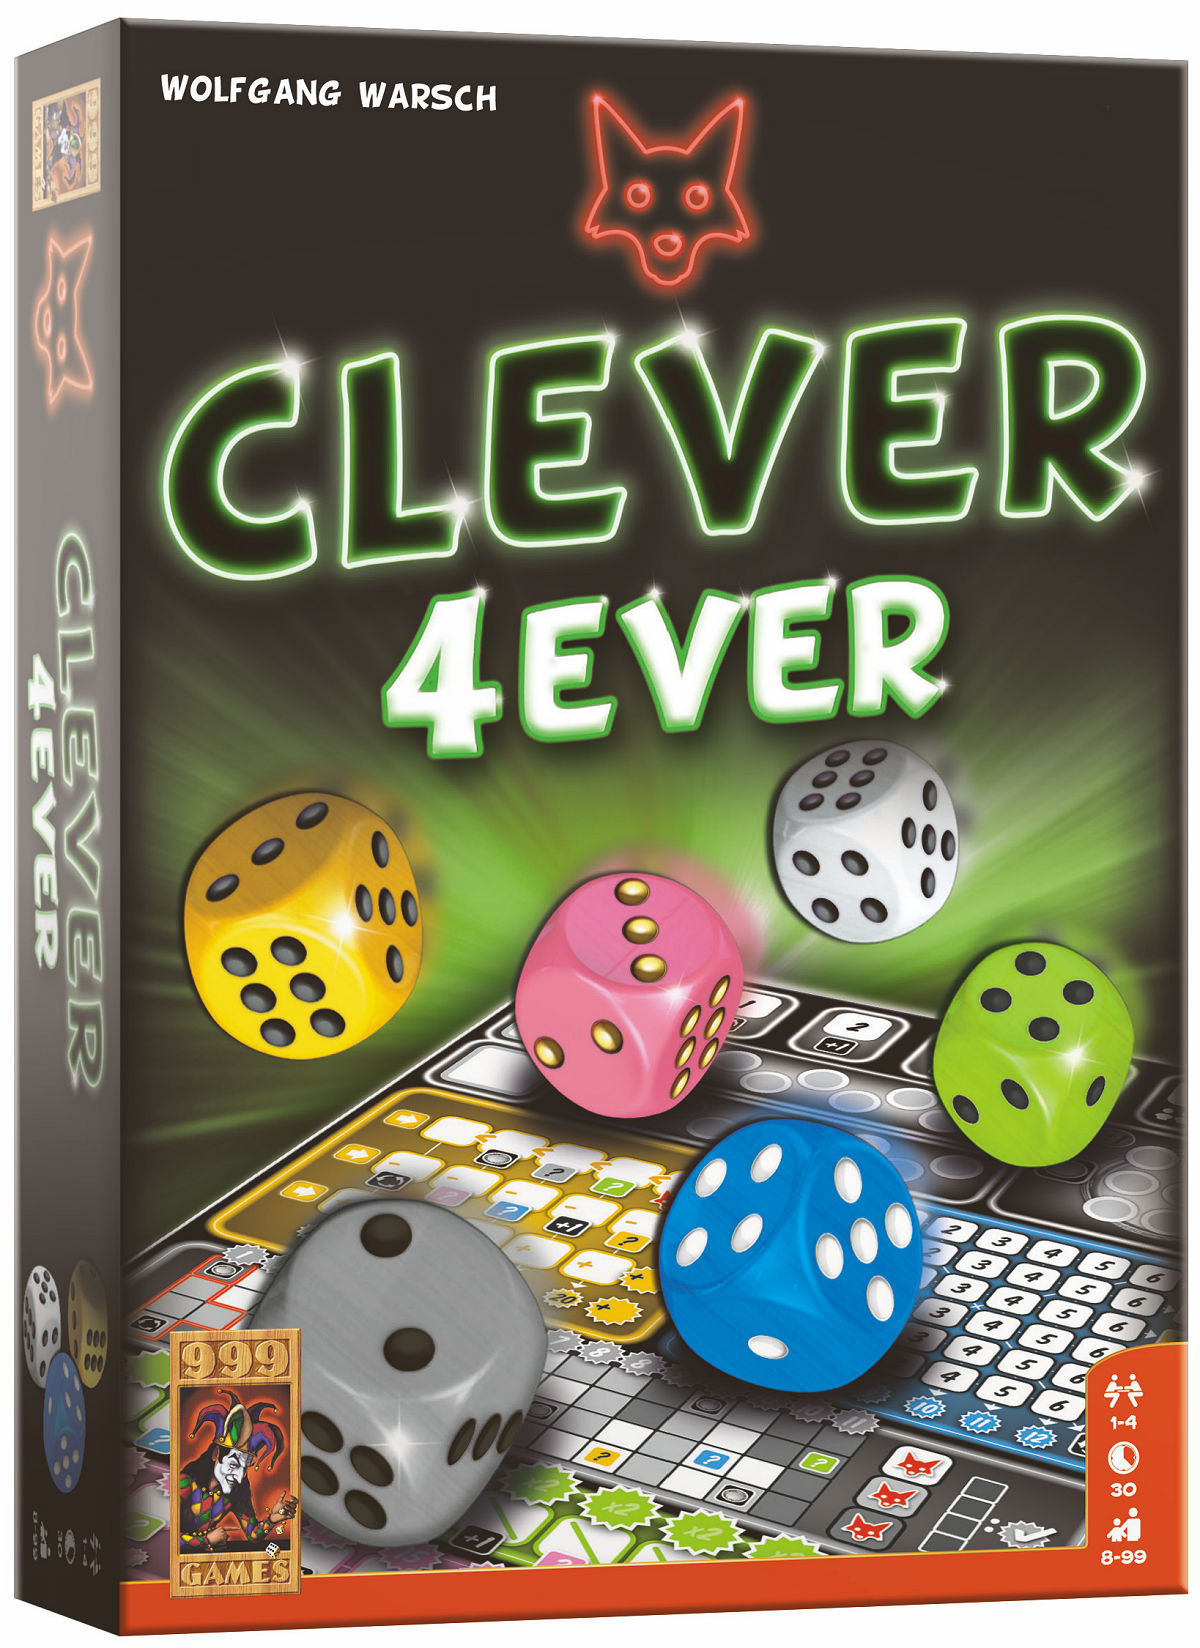 CLEVER 4 EVER - 8720289474188 - 531967